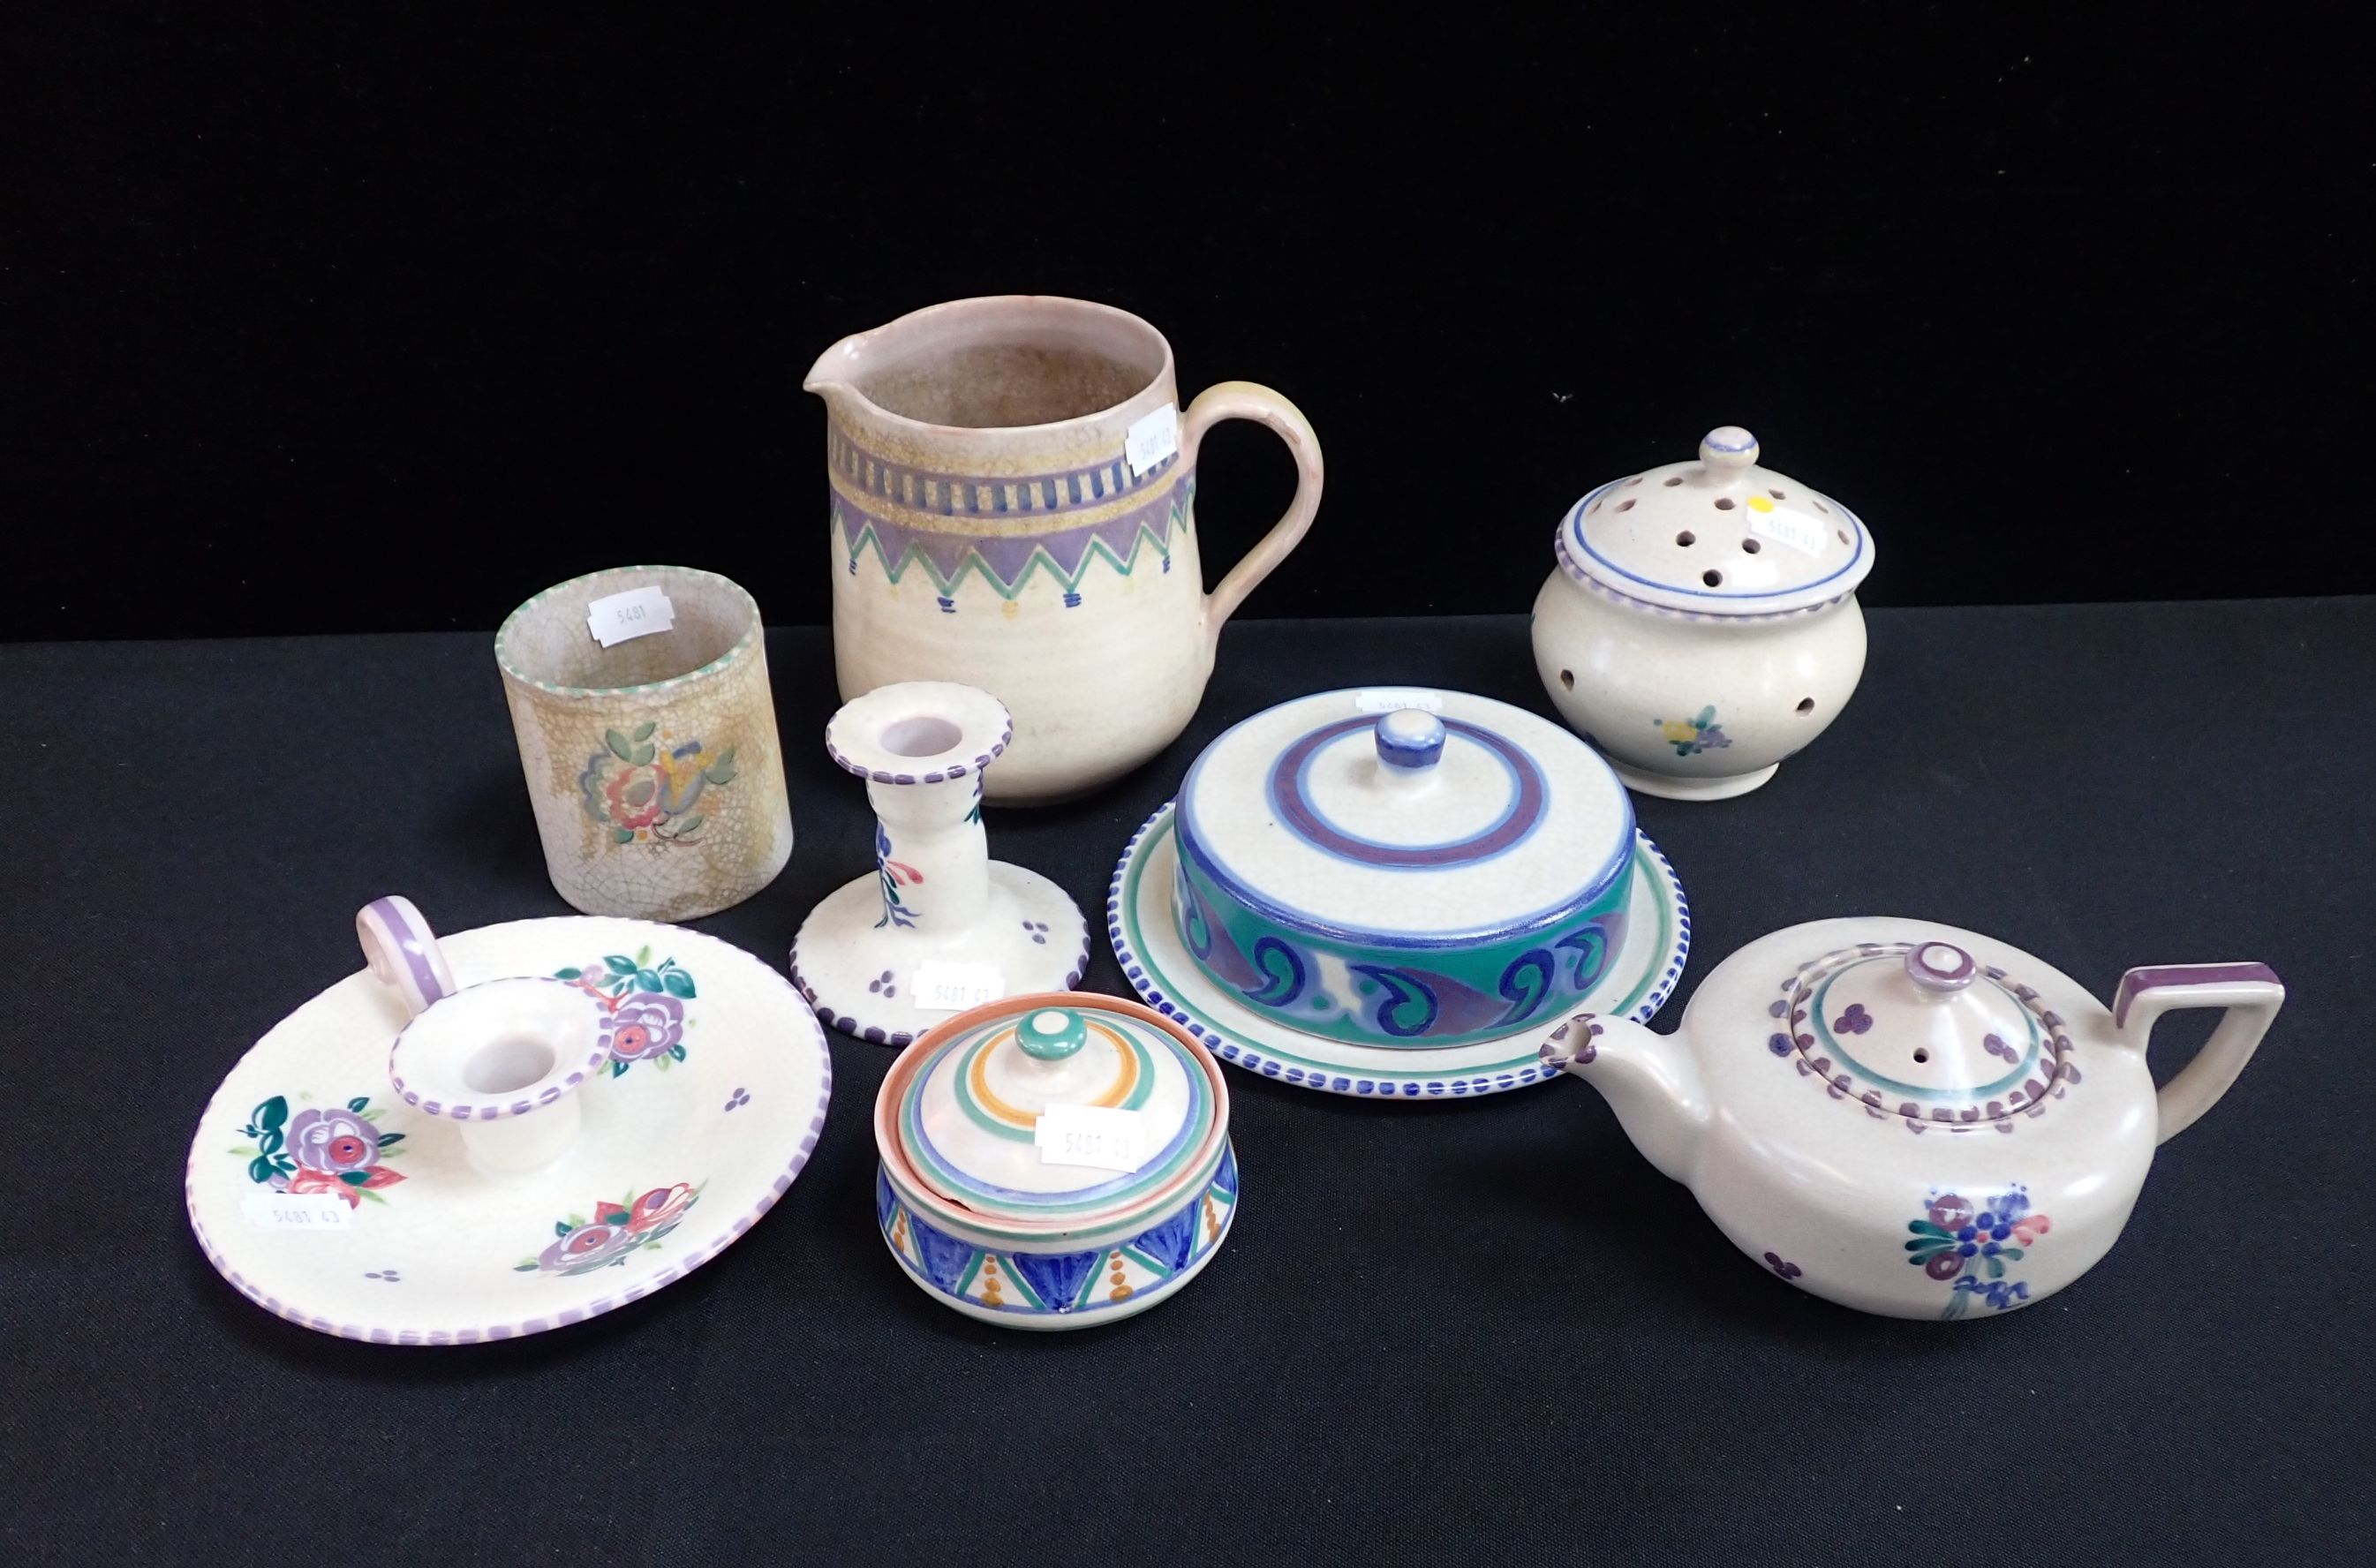 POOLE POTTERY: A FEW CARTER, STABLER, ADAMS PIECES